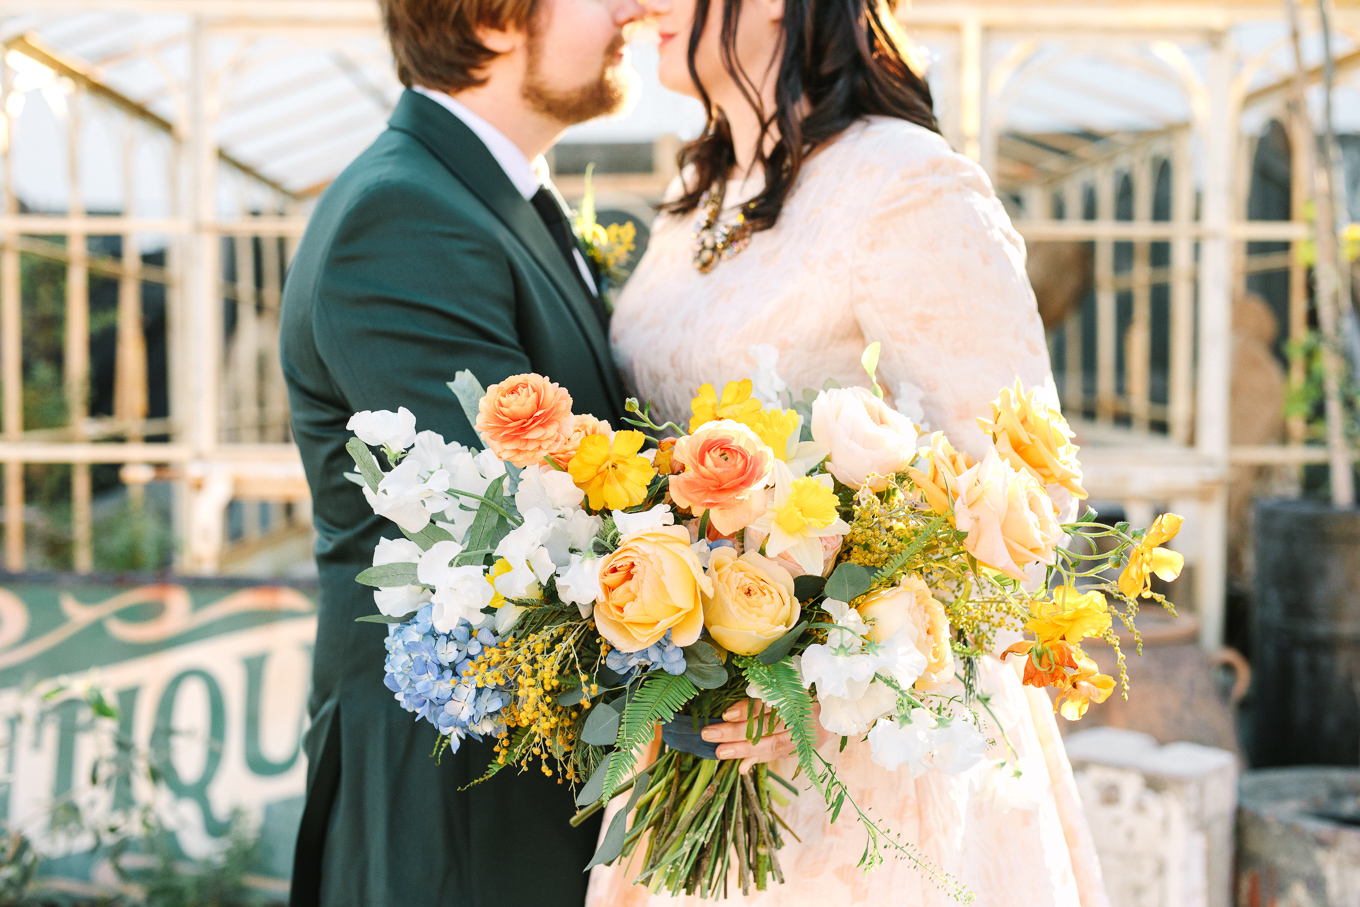 Lush yellow, peach and blue bouquet with daffodils | Beautiful bridal bouquet inspiration and advice | Colorful and elevated wedding photography for fun-loving couples in Southern California | #weddingflowers #weddingbouquet #bridebouquet #bouquetideas #uniquebouquet   Source: Mary Costa Photography | Los Angeles